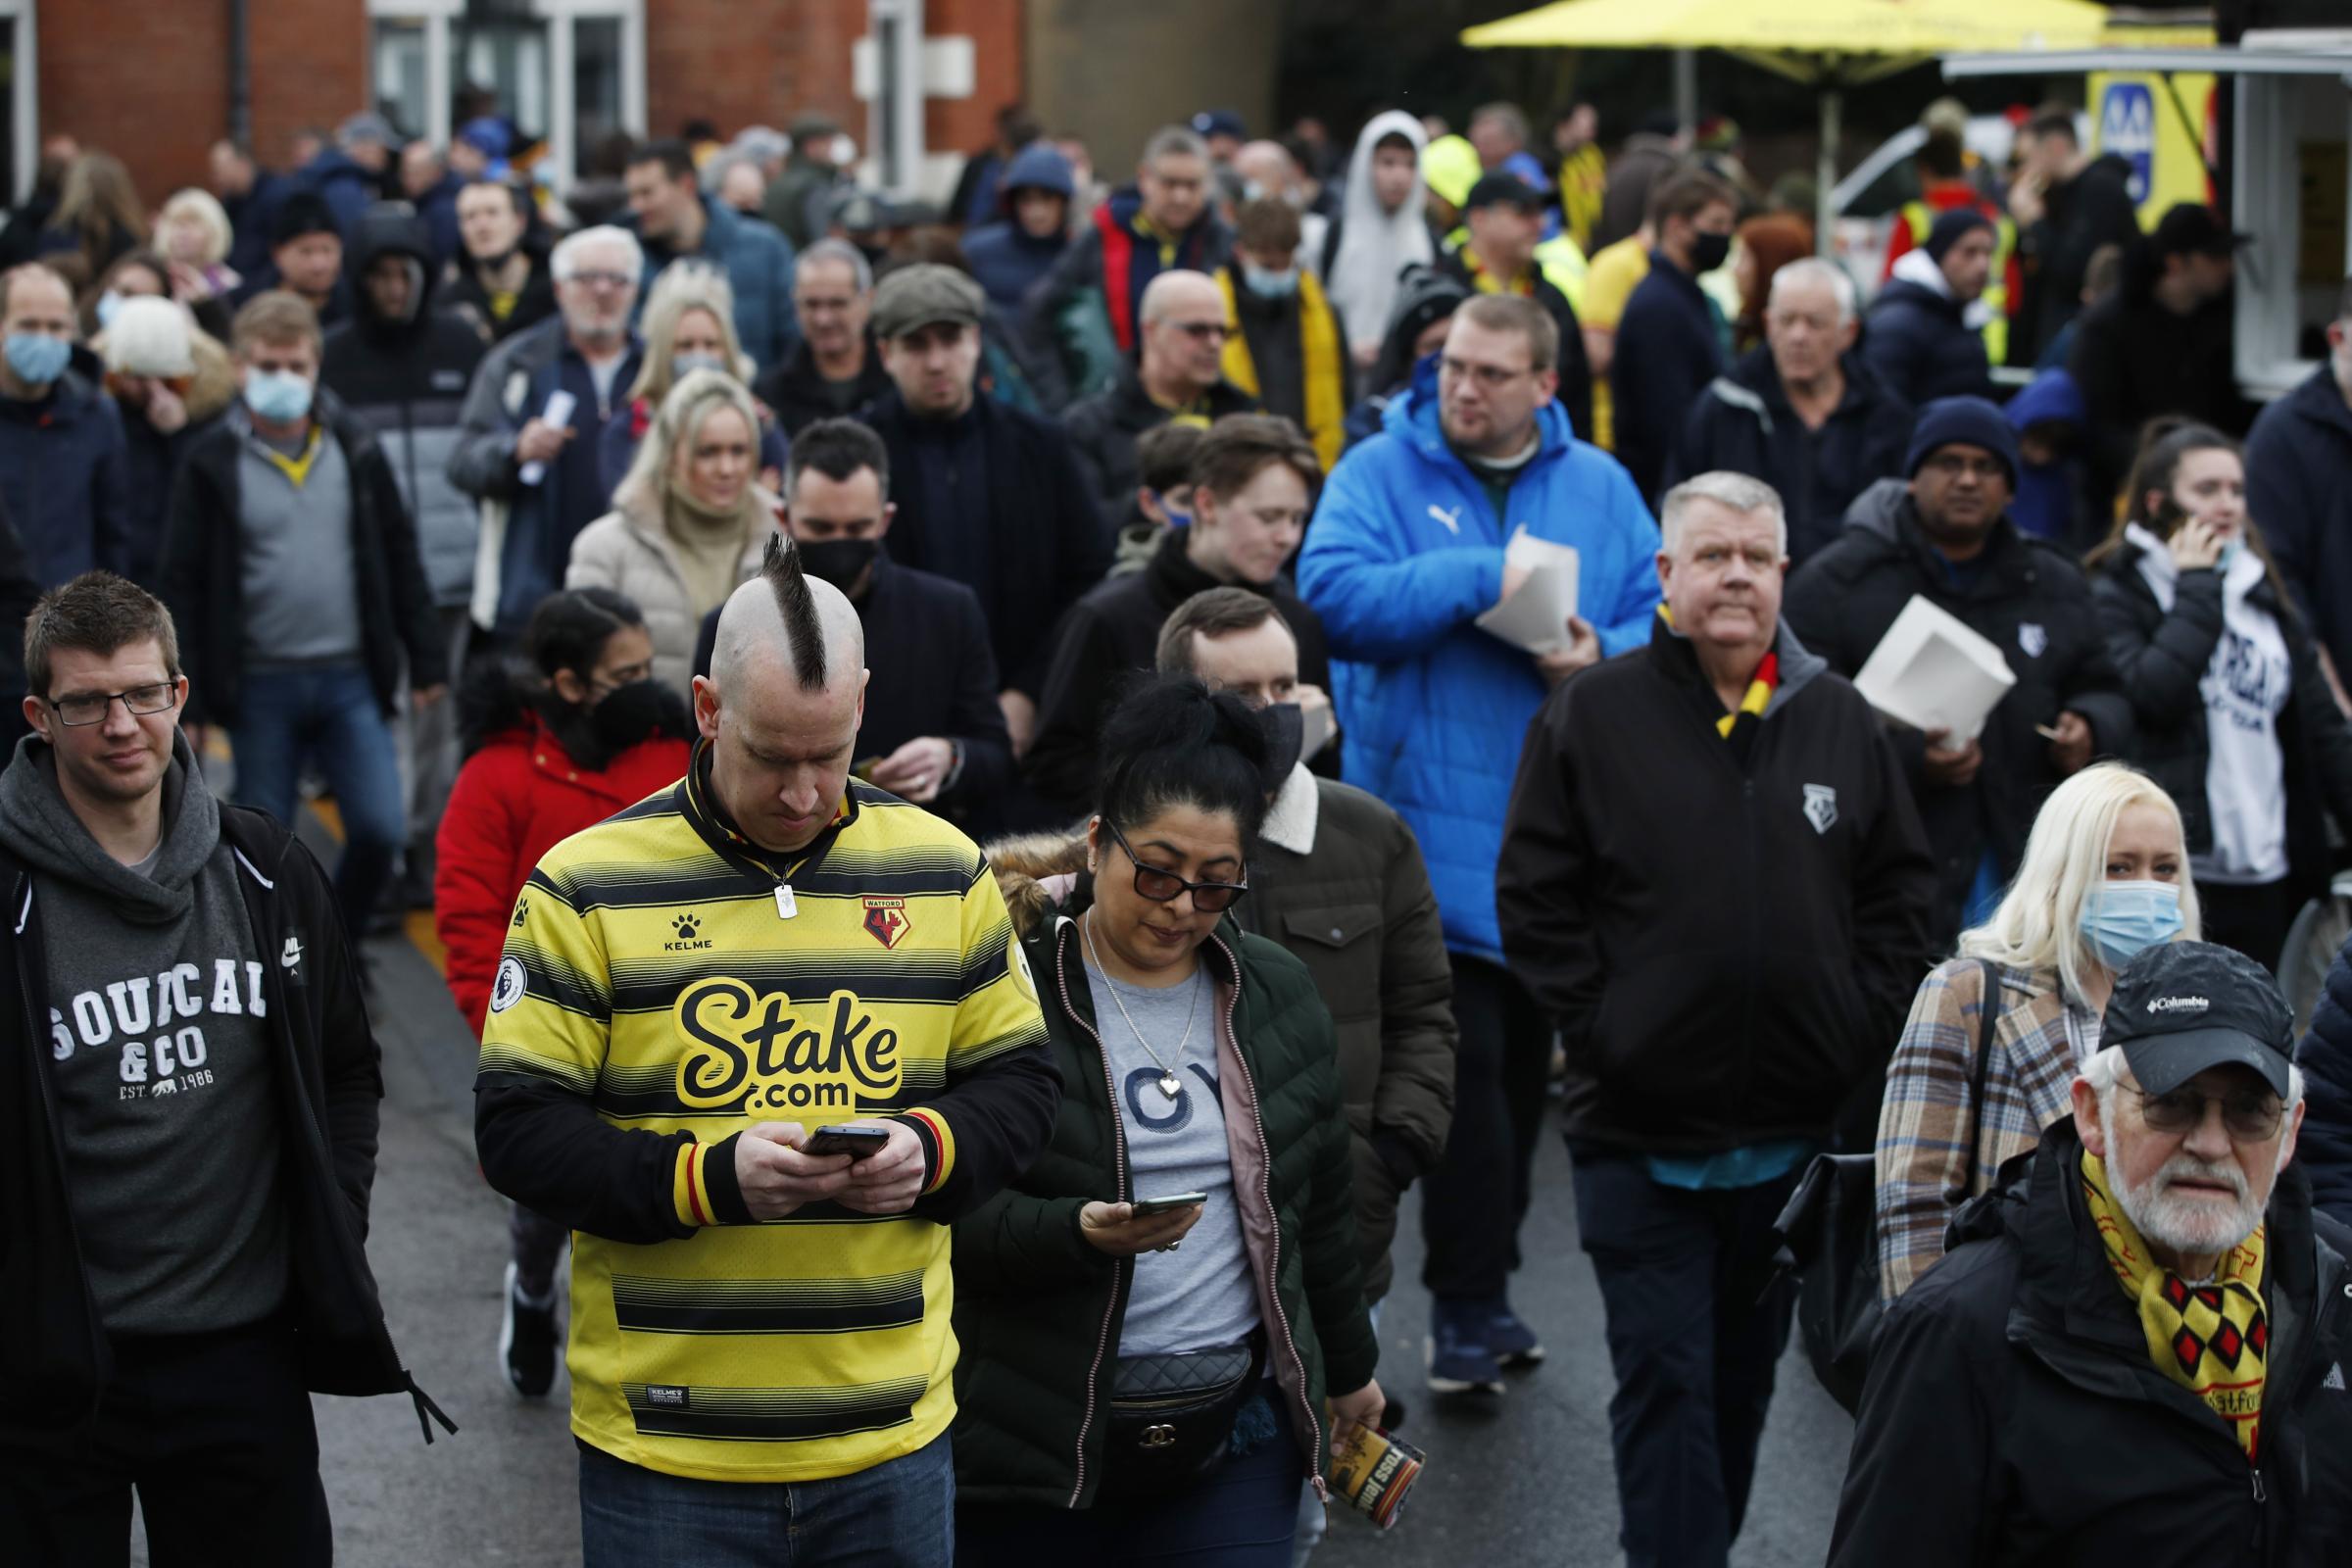 Watford to keep looking at improving communication with fans